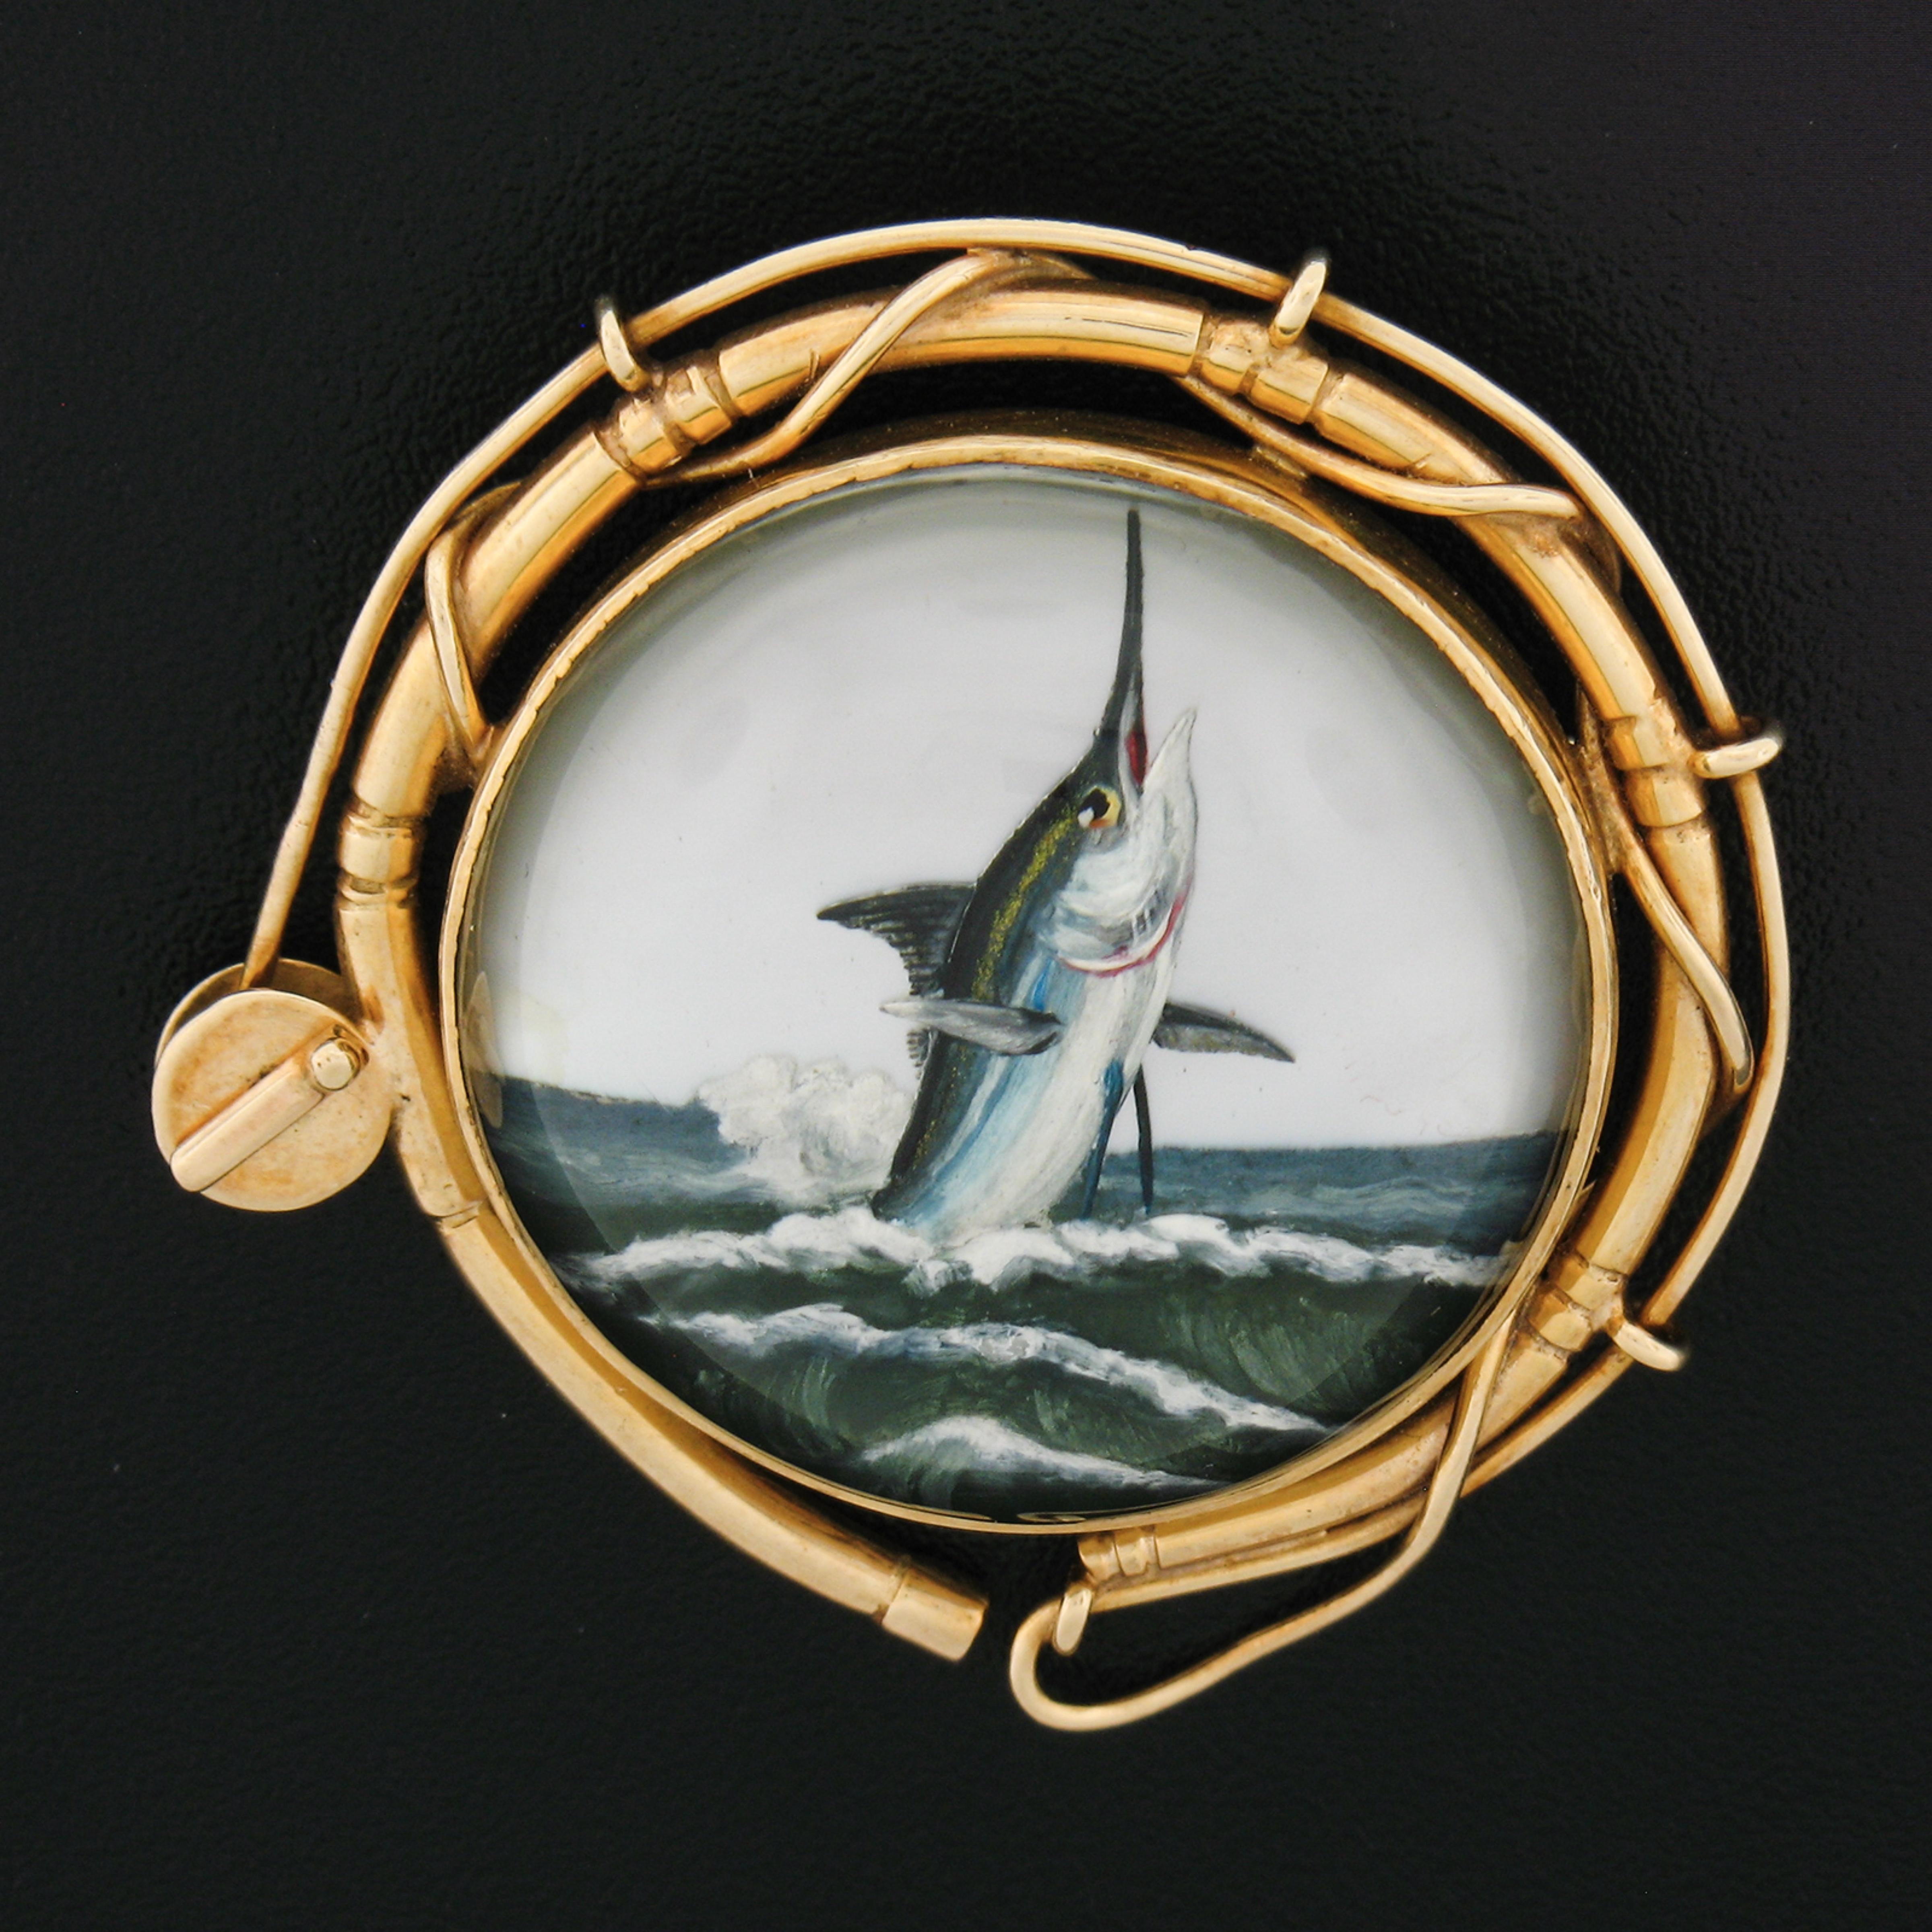 This magnificent vintage brooch was crafted from solid 14k yellow gold. It features an incredibly detailed reverse intaglio of a Marlin fish coming out of the water. The frame features an outstandingly detailed design of a fishing reel surrounding